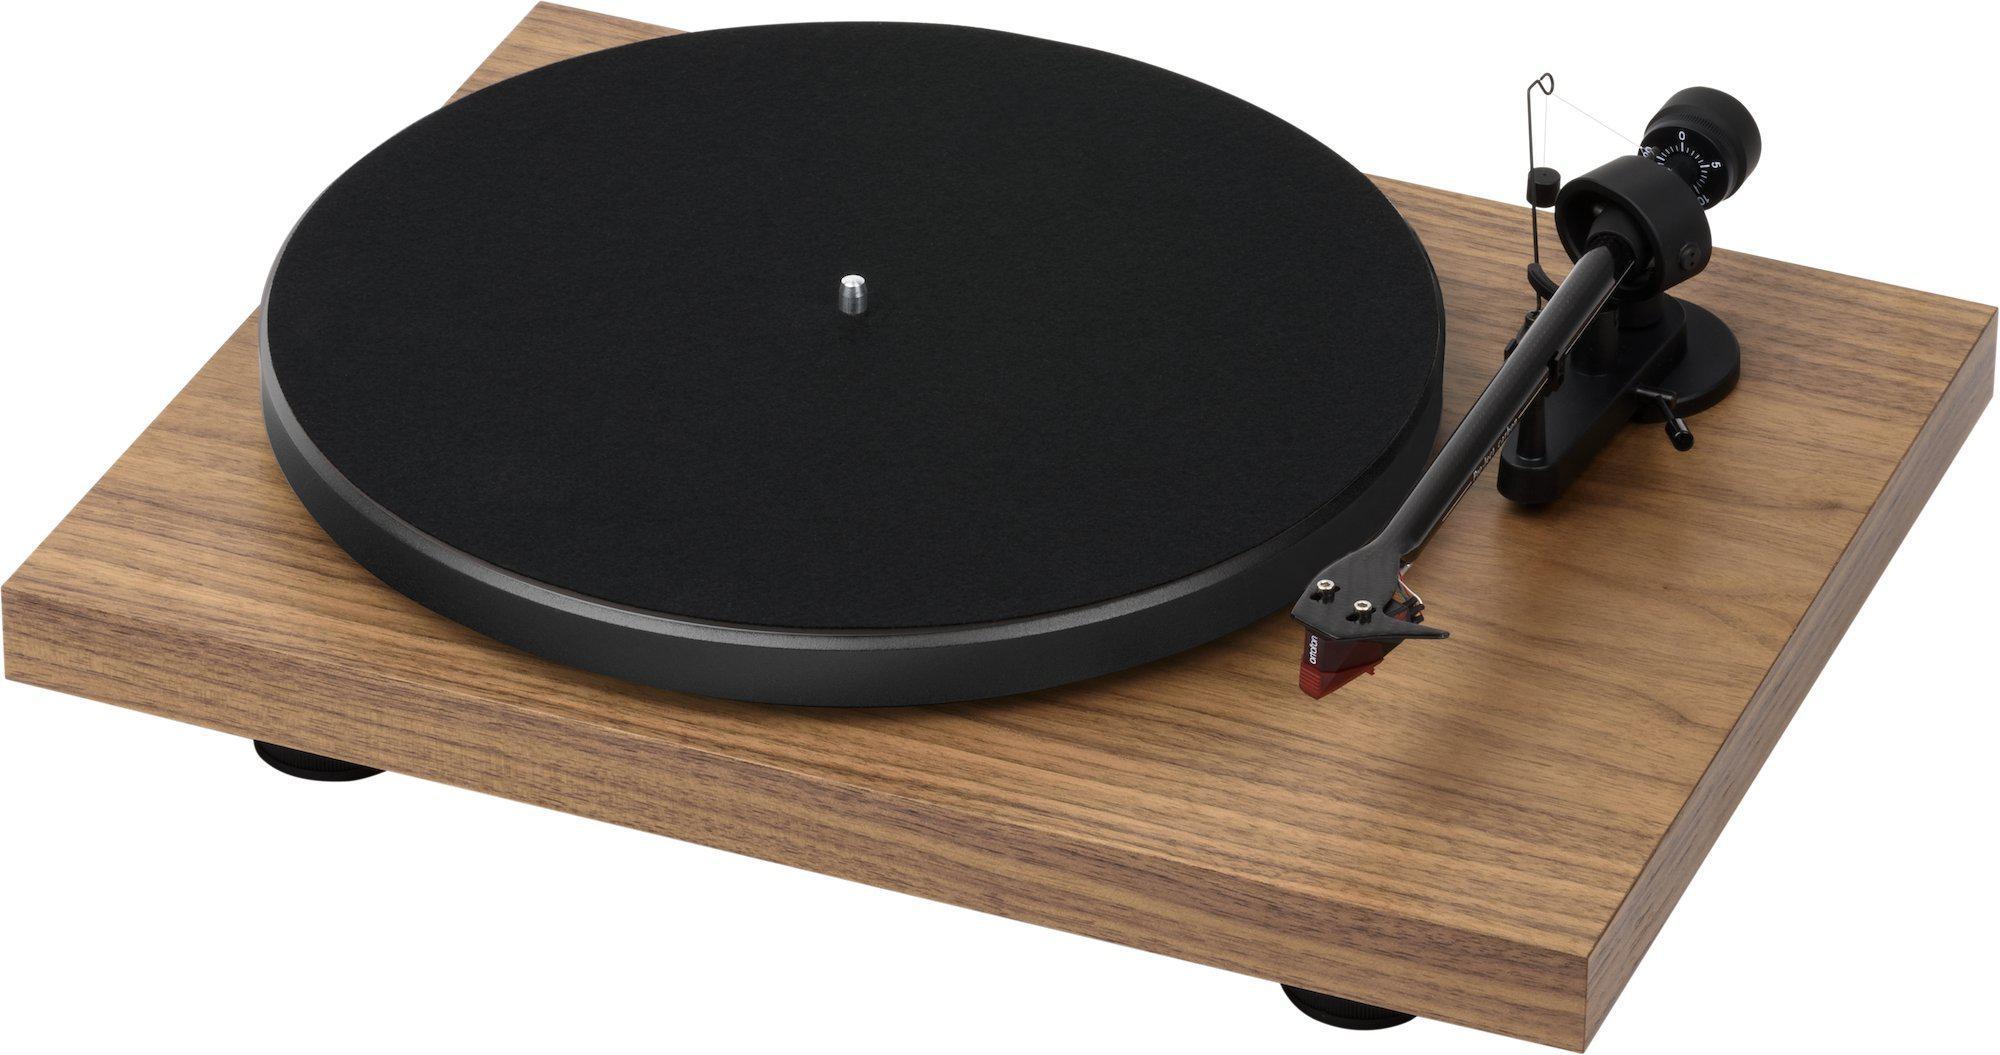 pro-ject-debut-carbon-turntable-in-walnut-with-ortofon-2m-red-cartridge-project-audio-systems